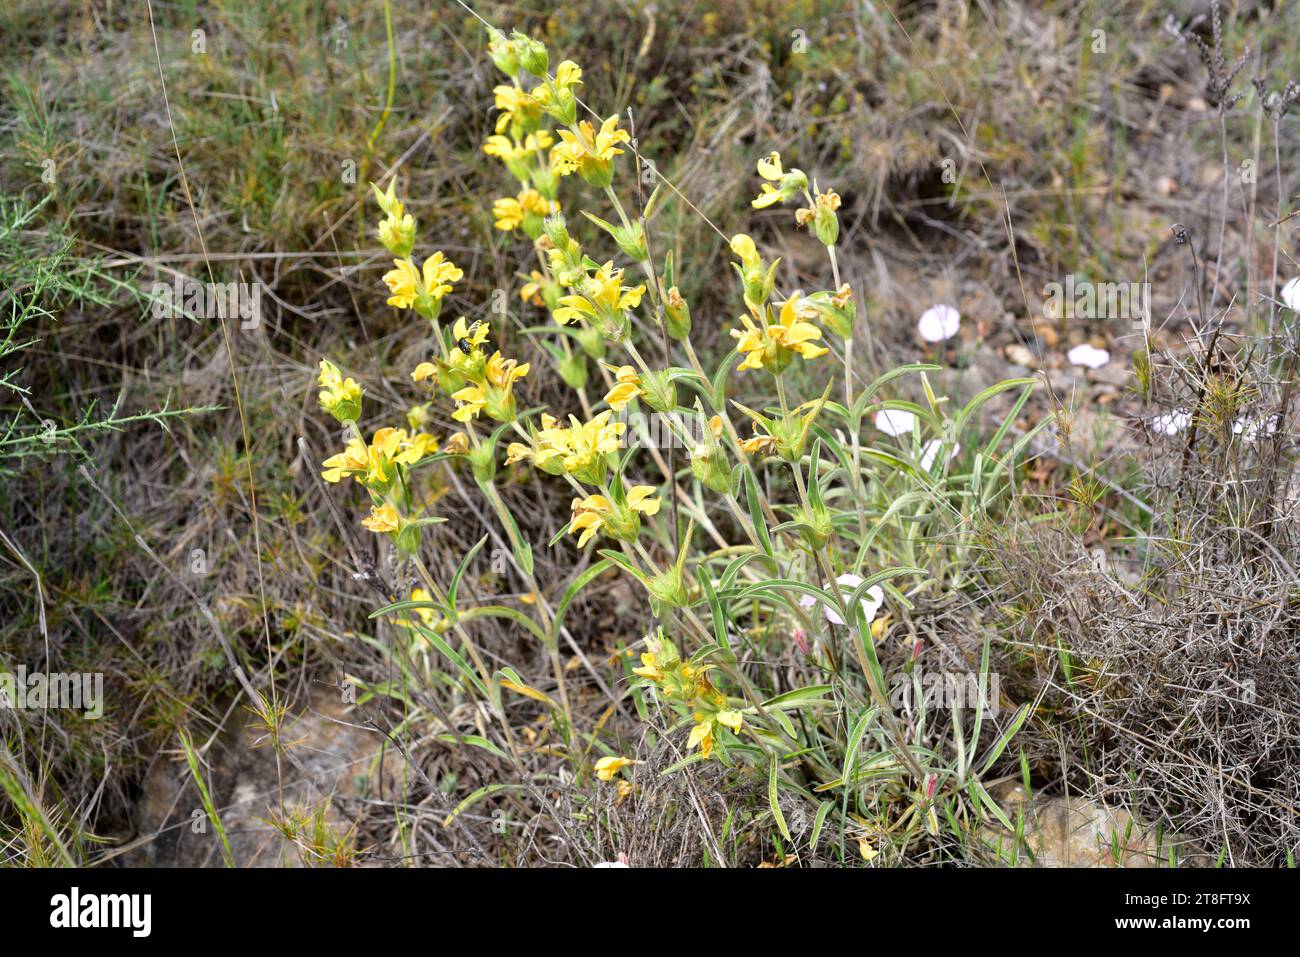 Lamwick plant (Phlomis lychnitis) is a subshrub native to Spain, Portugal and France. This photo was taken in Alquezar, Huesca, Aragon, Spain. Stock Photo